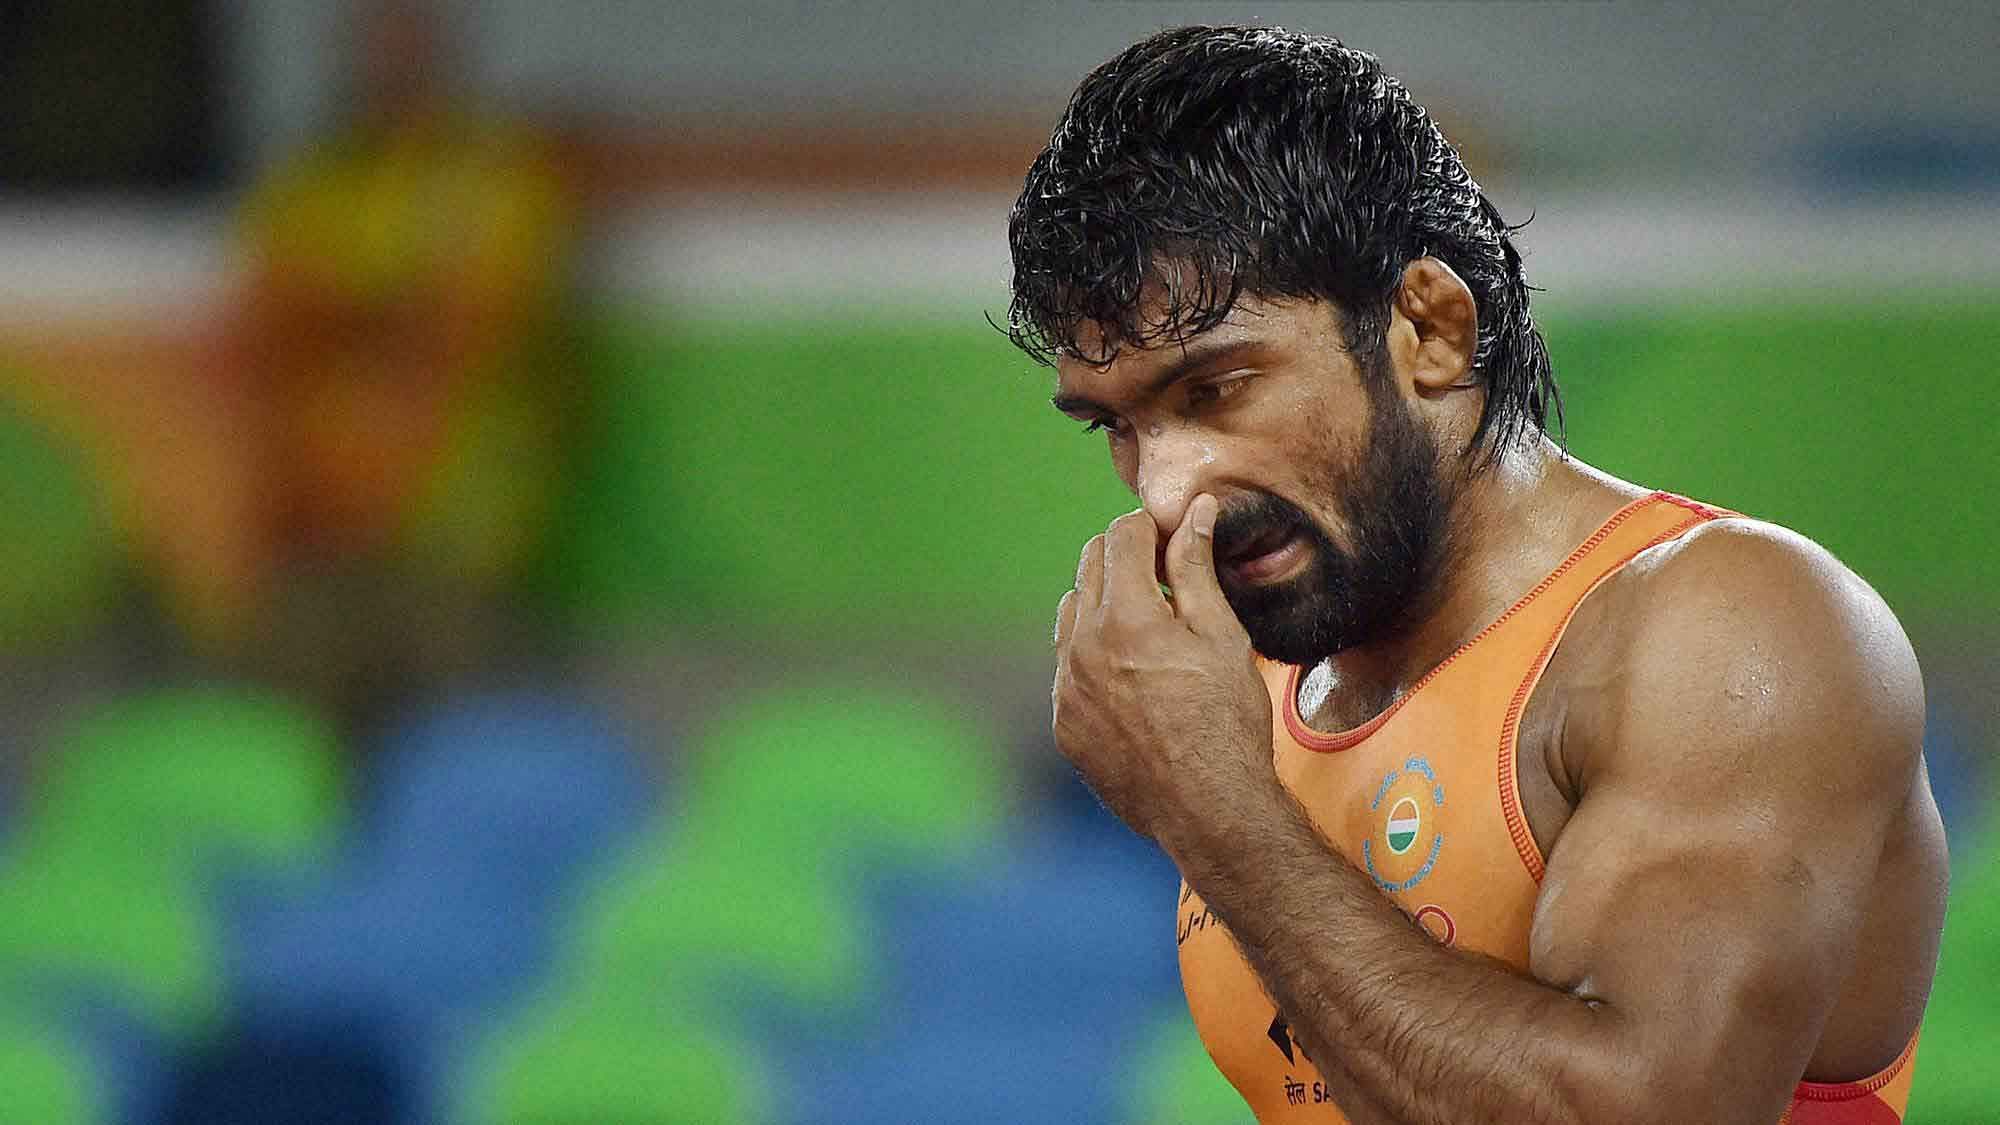 Yogeshwar Dutt in action in the first round bout at the Rio Olympics. (Photo: Reuters)